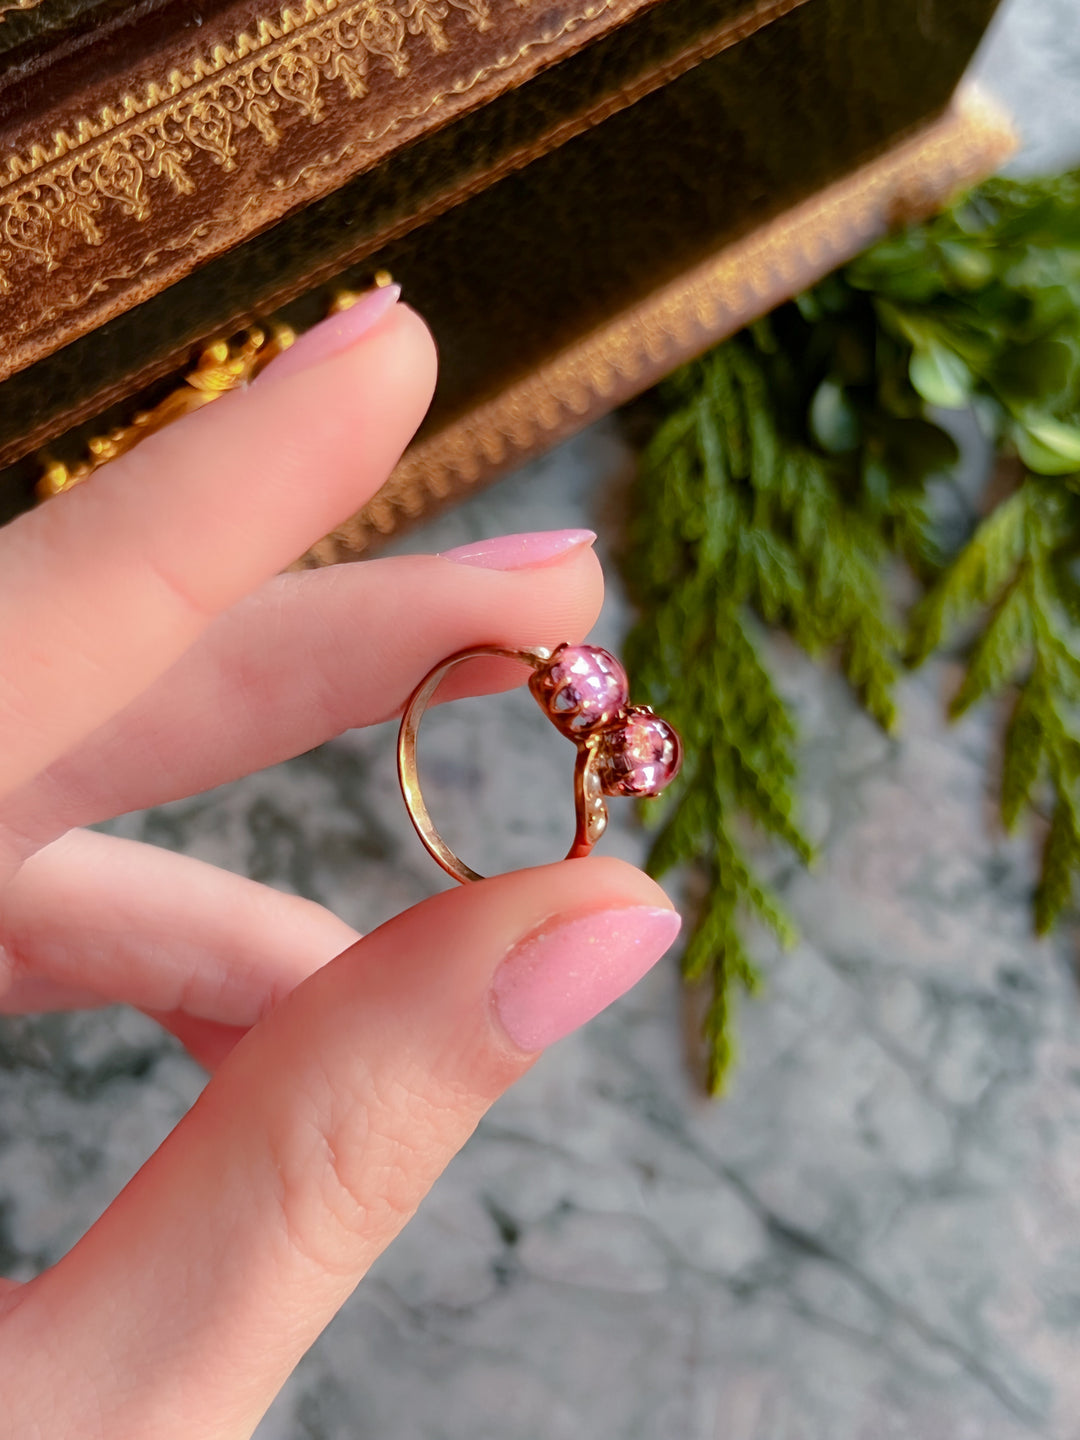 Candy Pink Tourmaline Cabochon Ring in 10ct